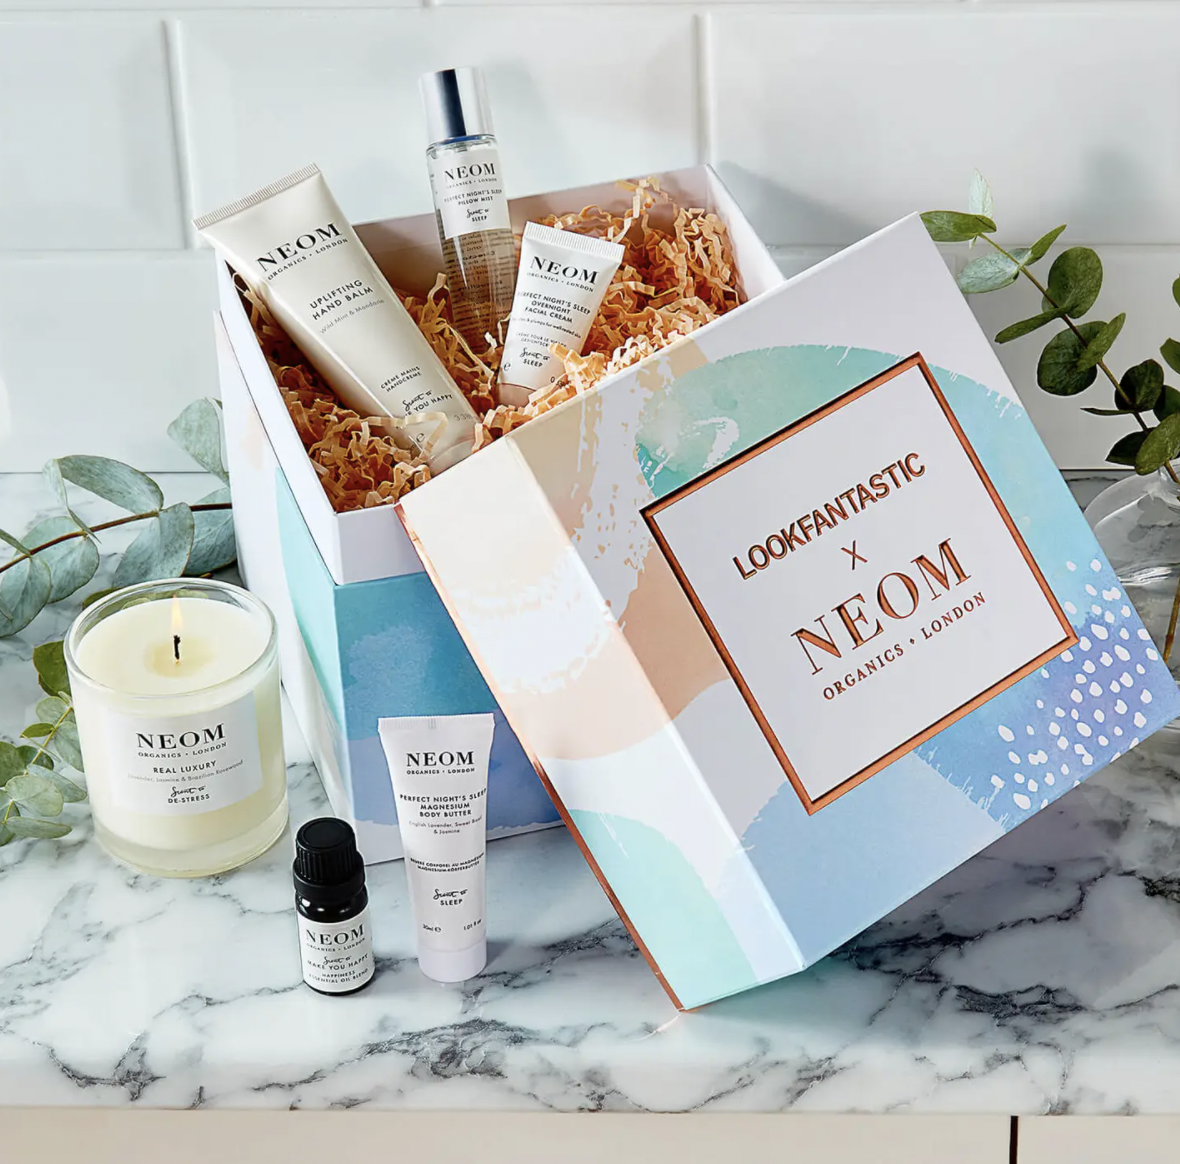 Lookfantastic x NEOM Limited Edition Beauty Box November 2021: Available Now + Coupon